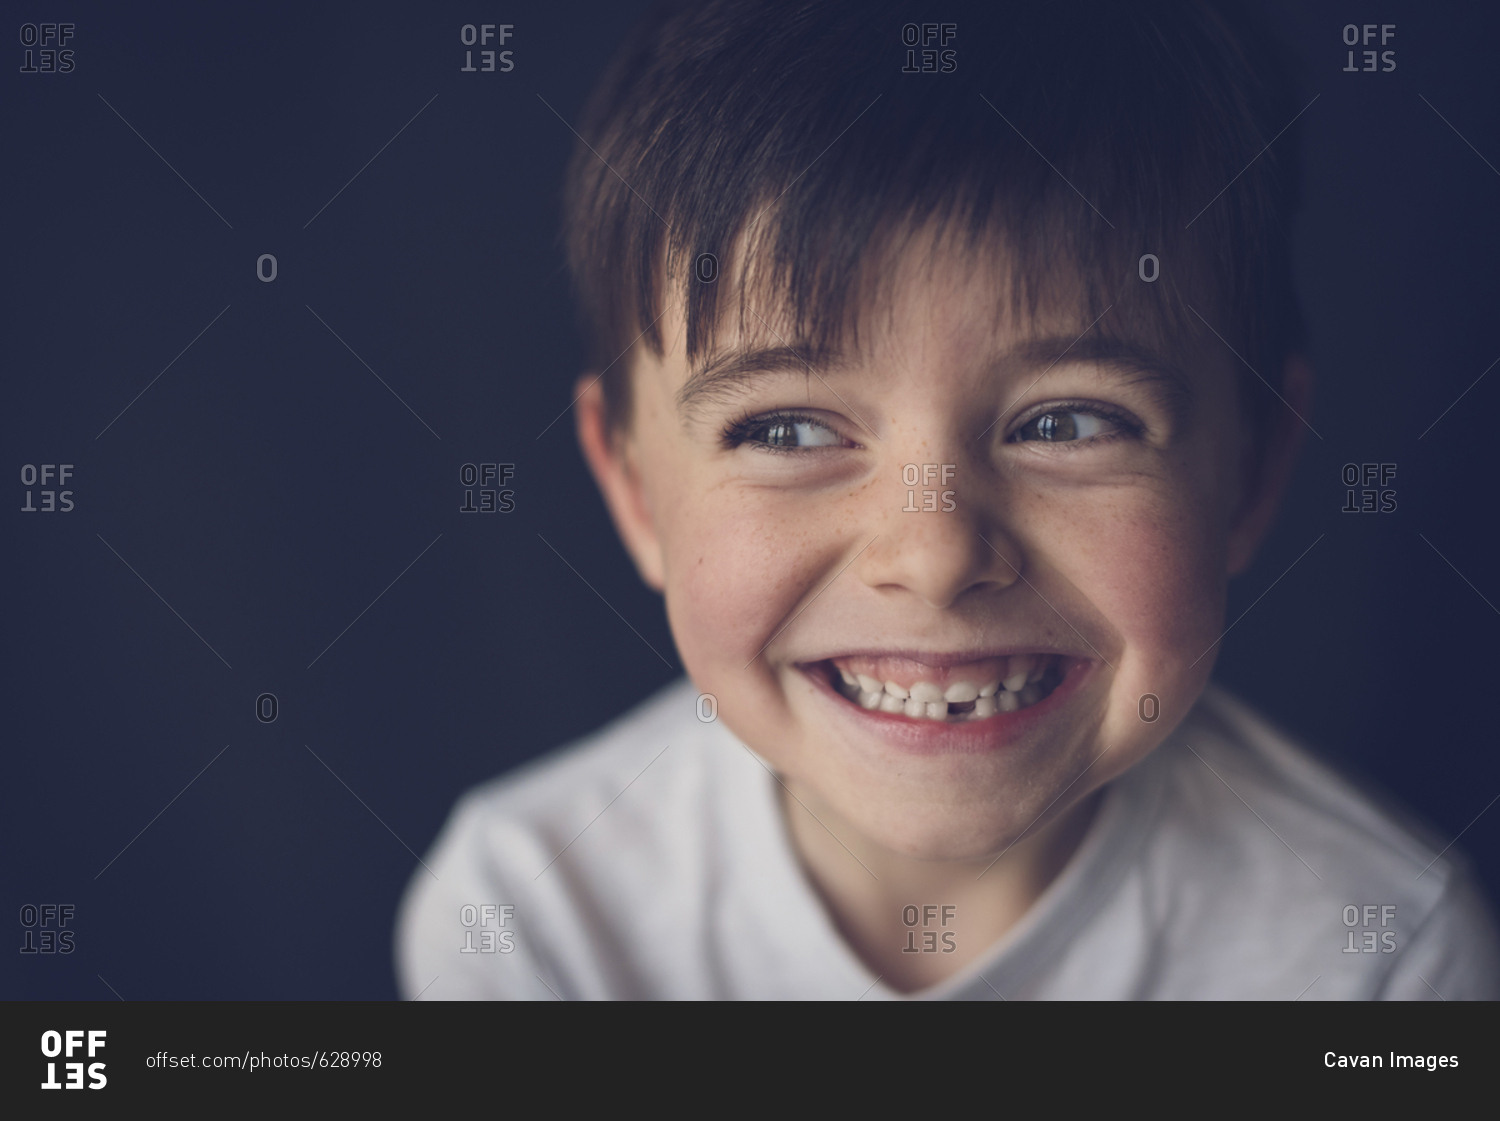 Close-up of cheerful boy clenching teeth while looking through sideways glance